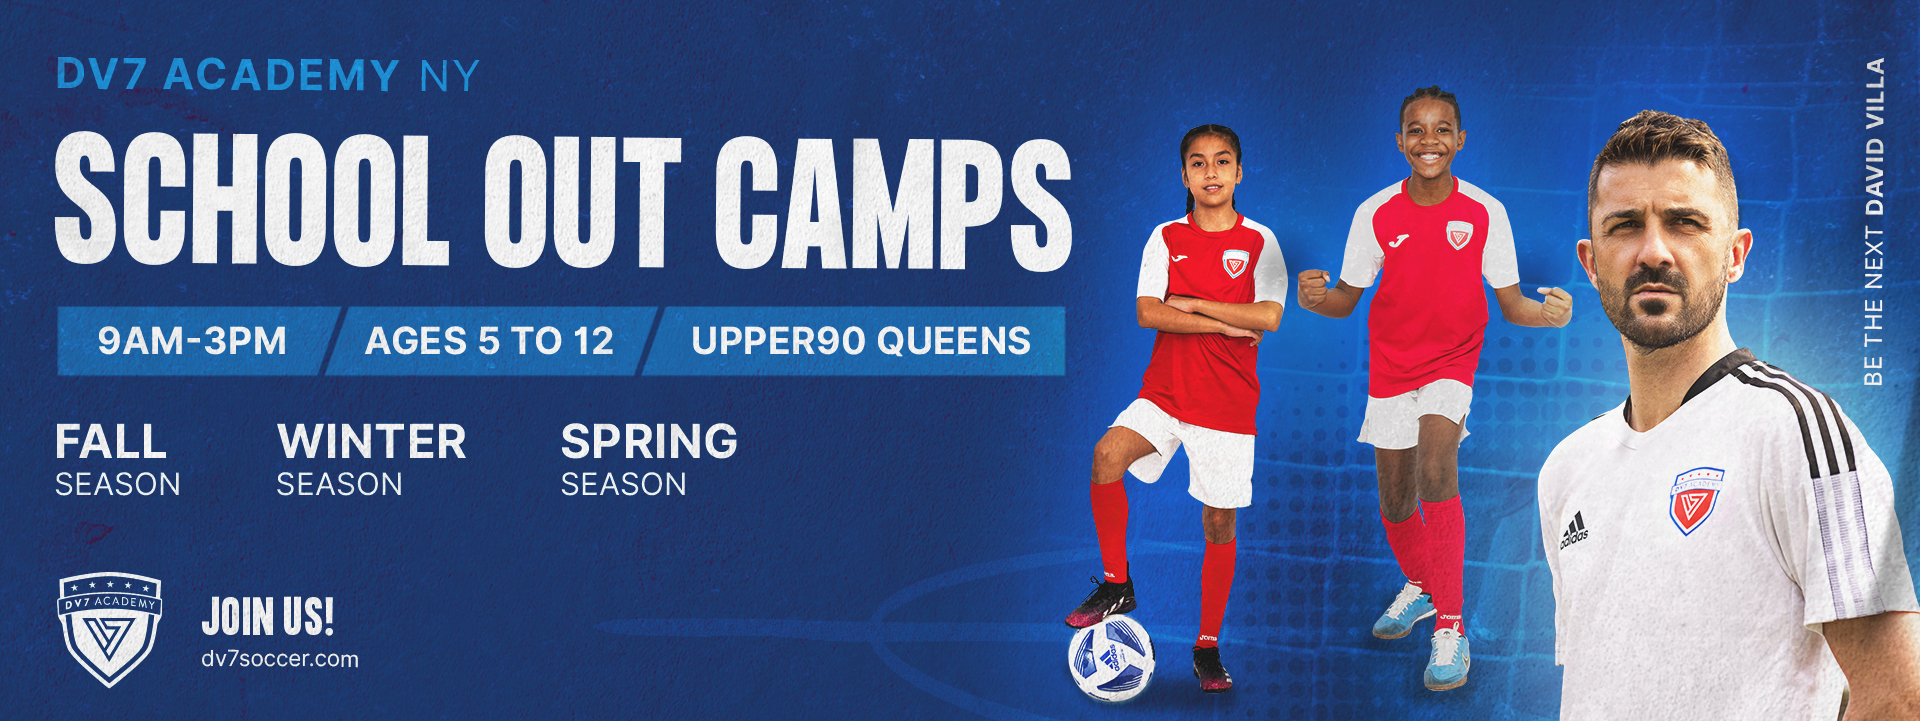 School out camps NY_Flyer_banner